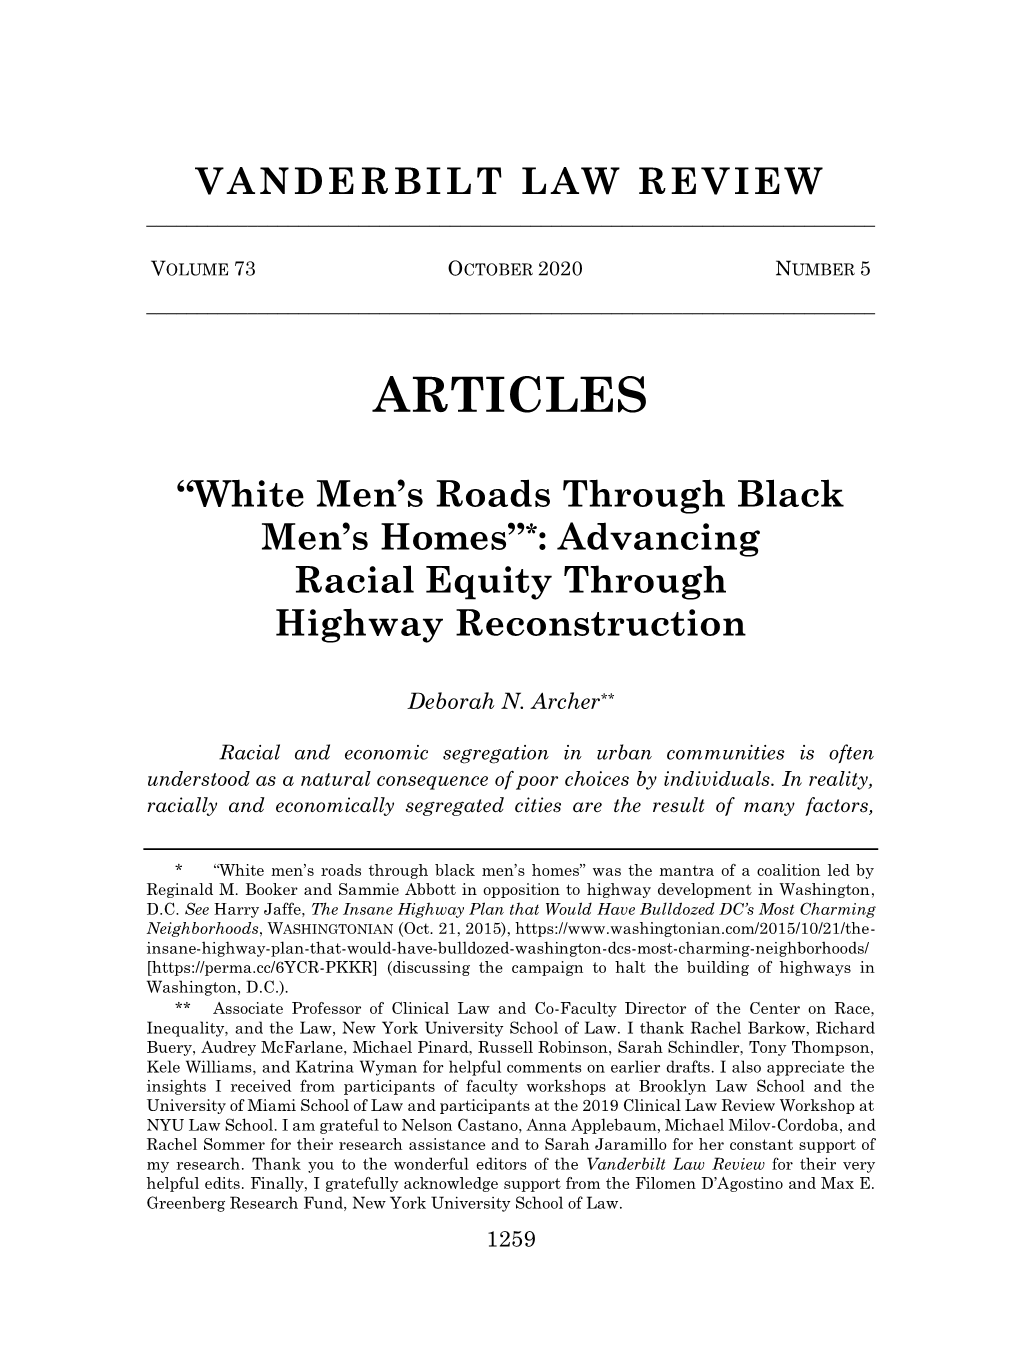 Advancing Racial Equity Through Highway Reconstruction